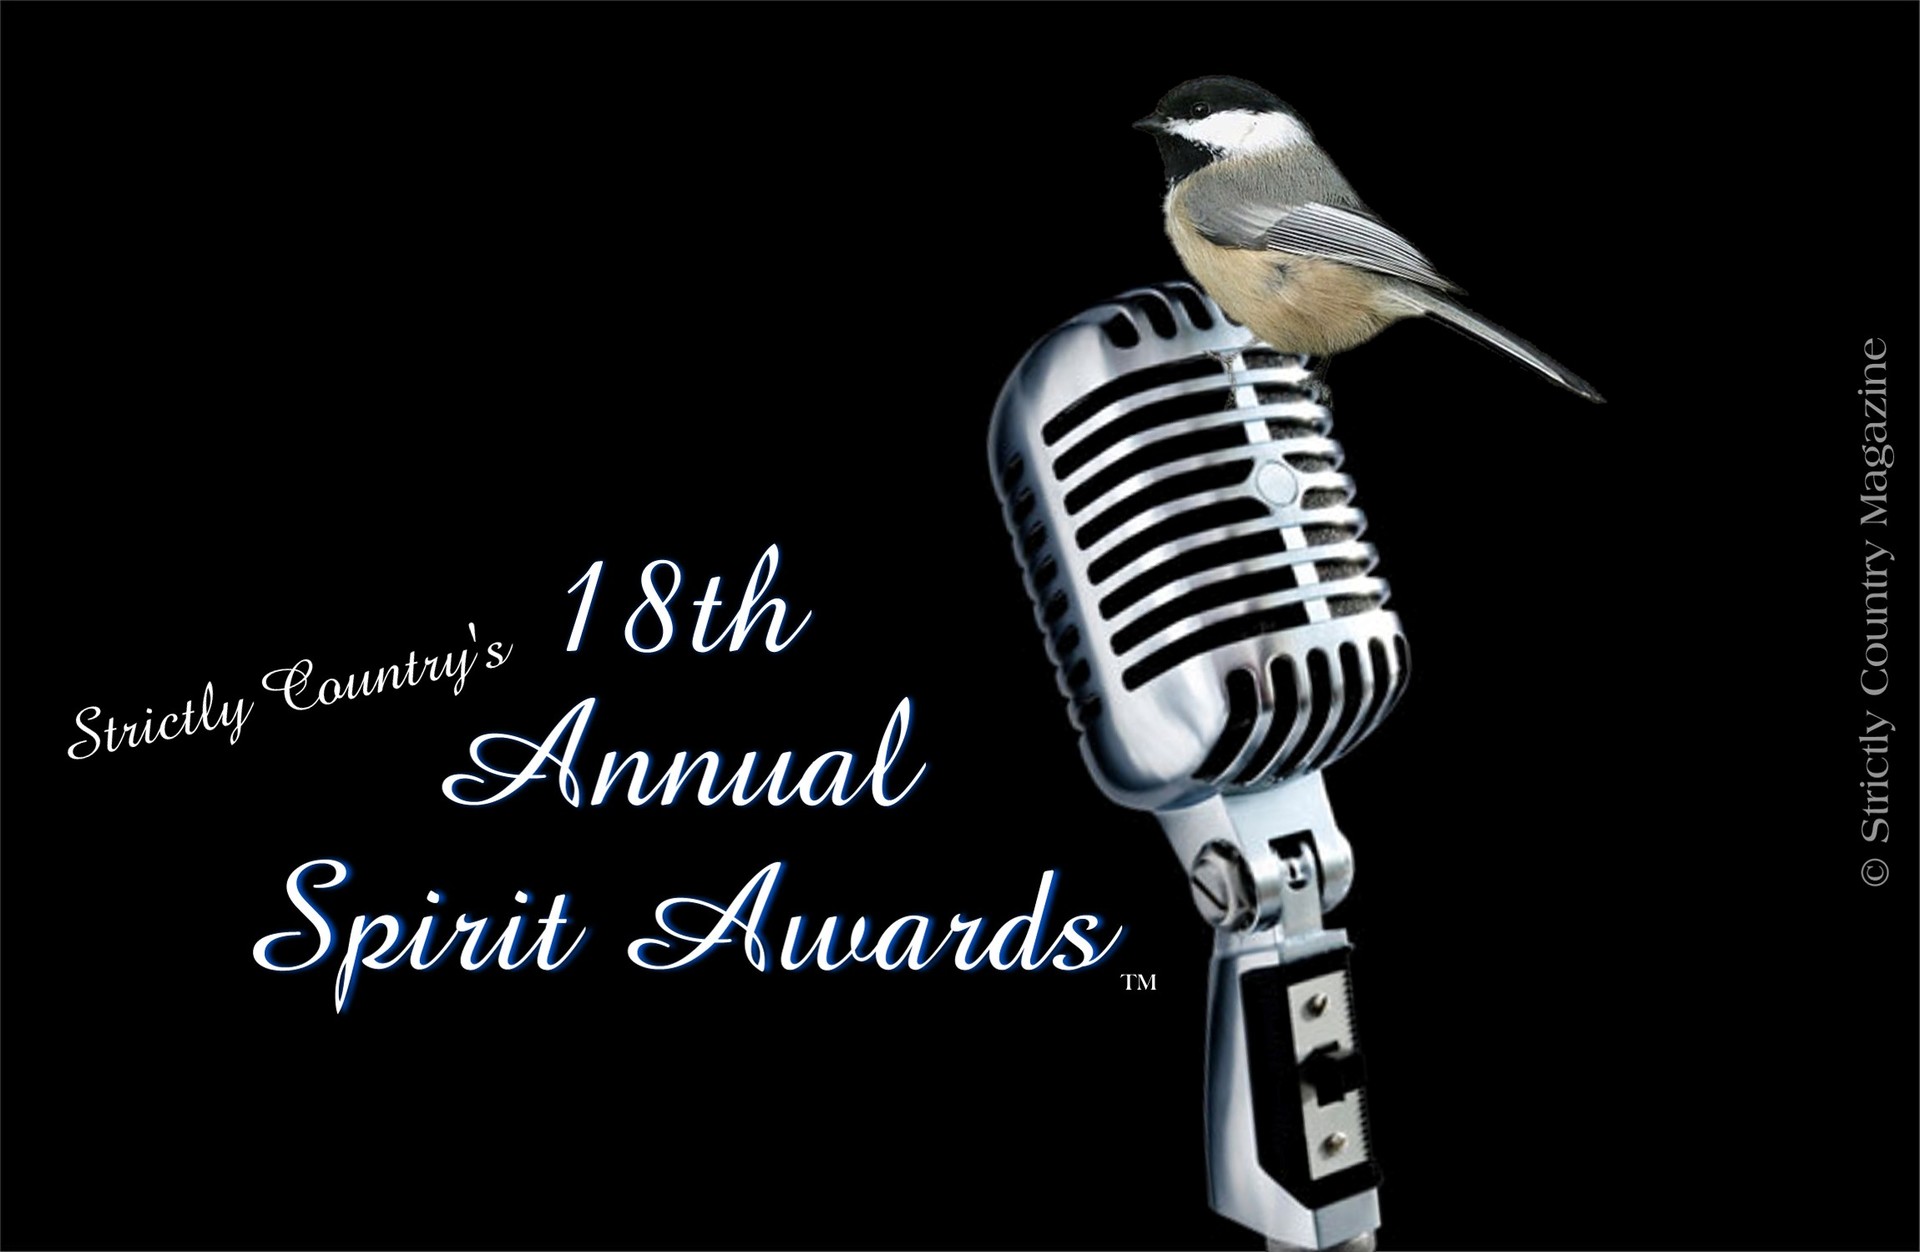 Strictly Country Magazine copyright 18th Annual Spirit Awards official logo